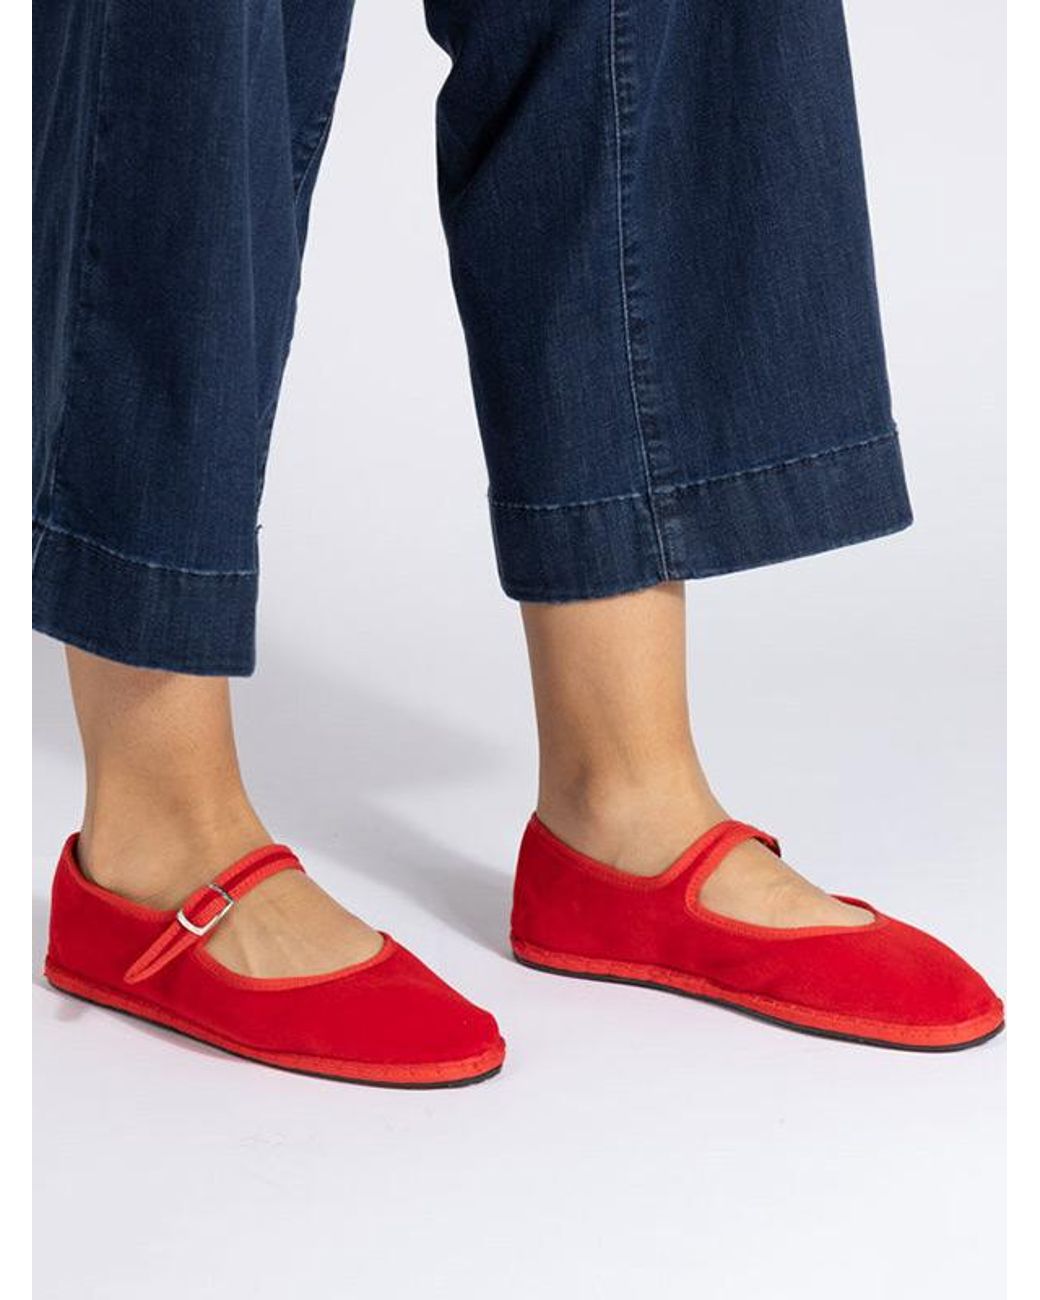 DROGHERIA CRIVELLINI Papusse Mary Jane Velvet in Red | Lyst